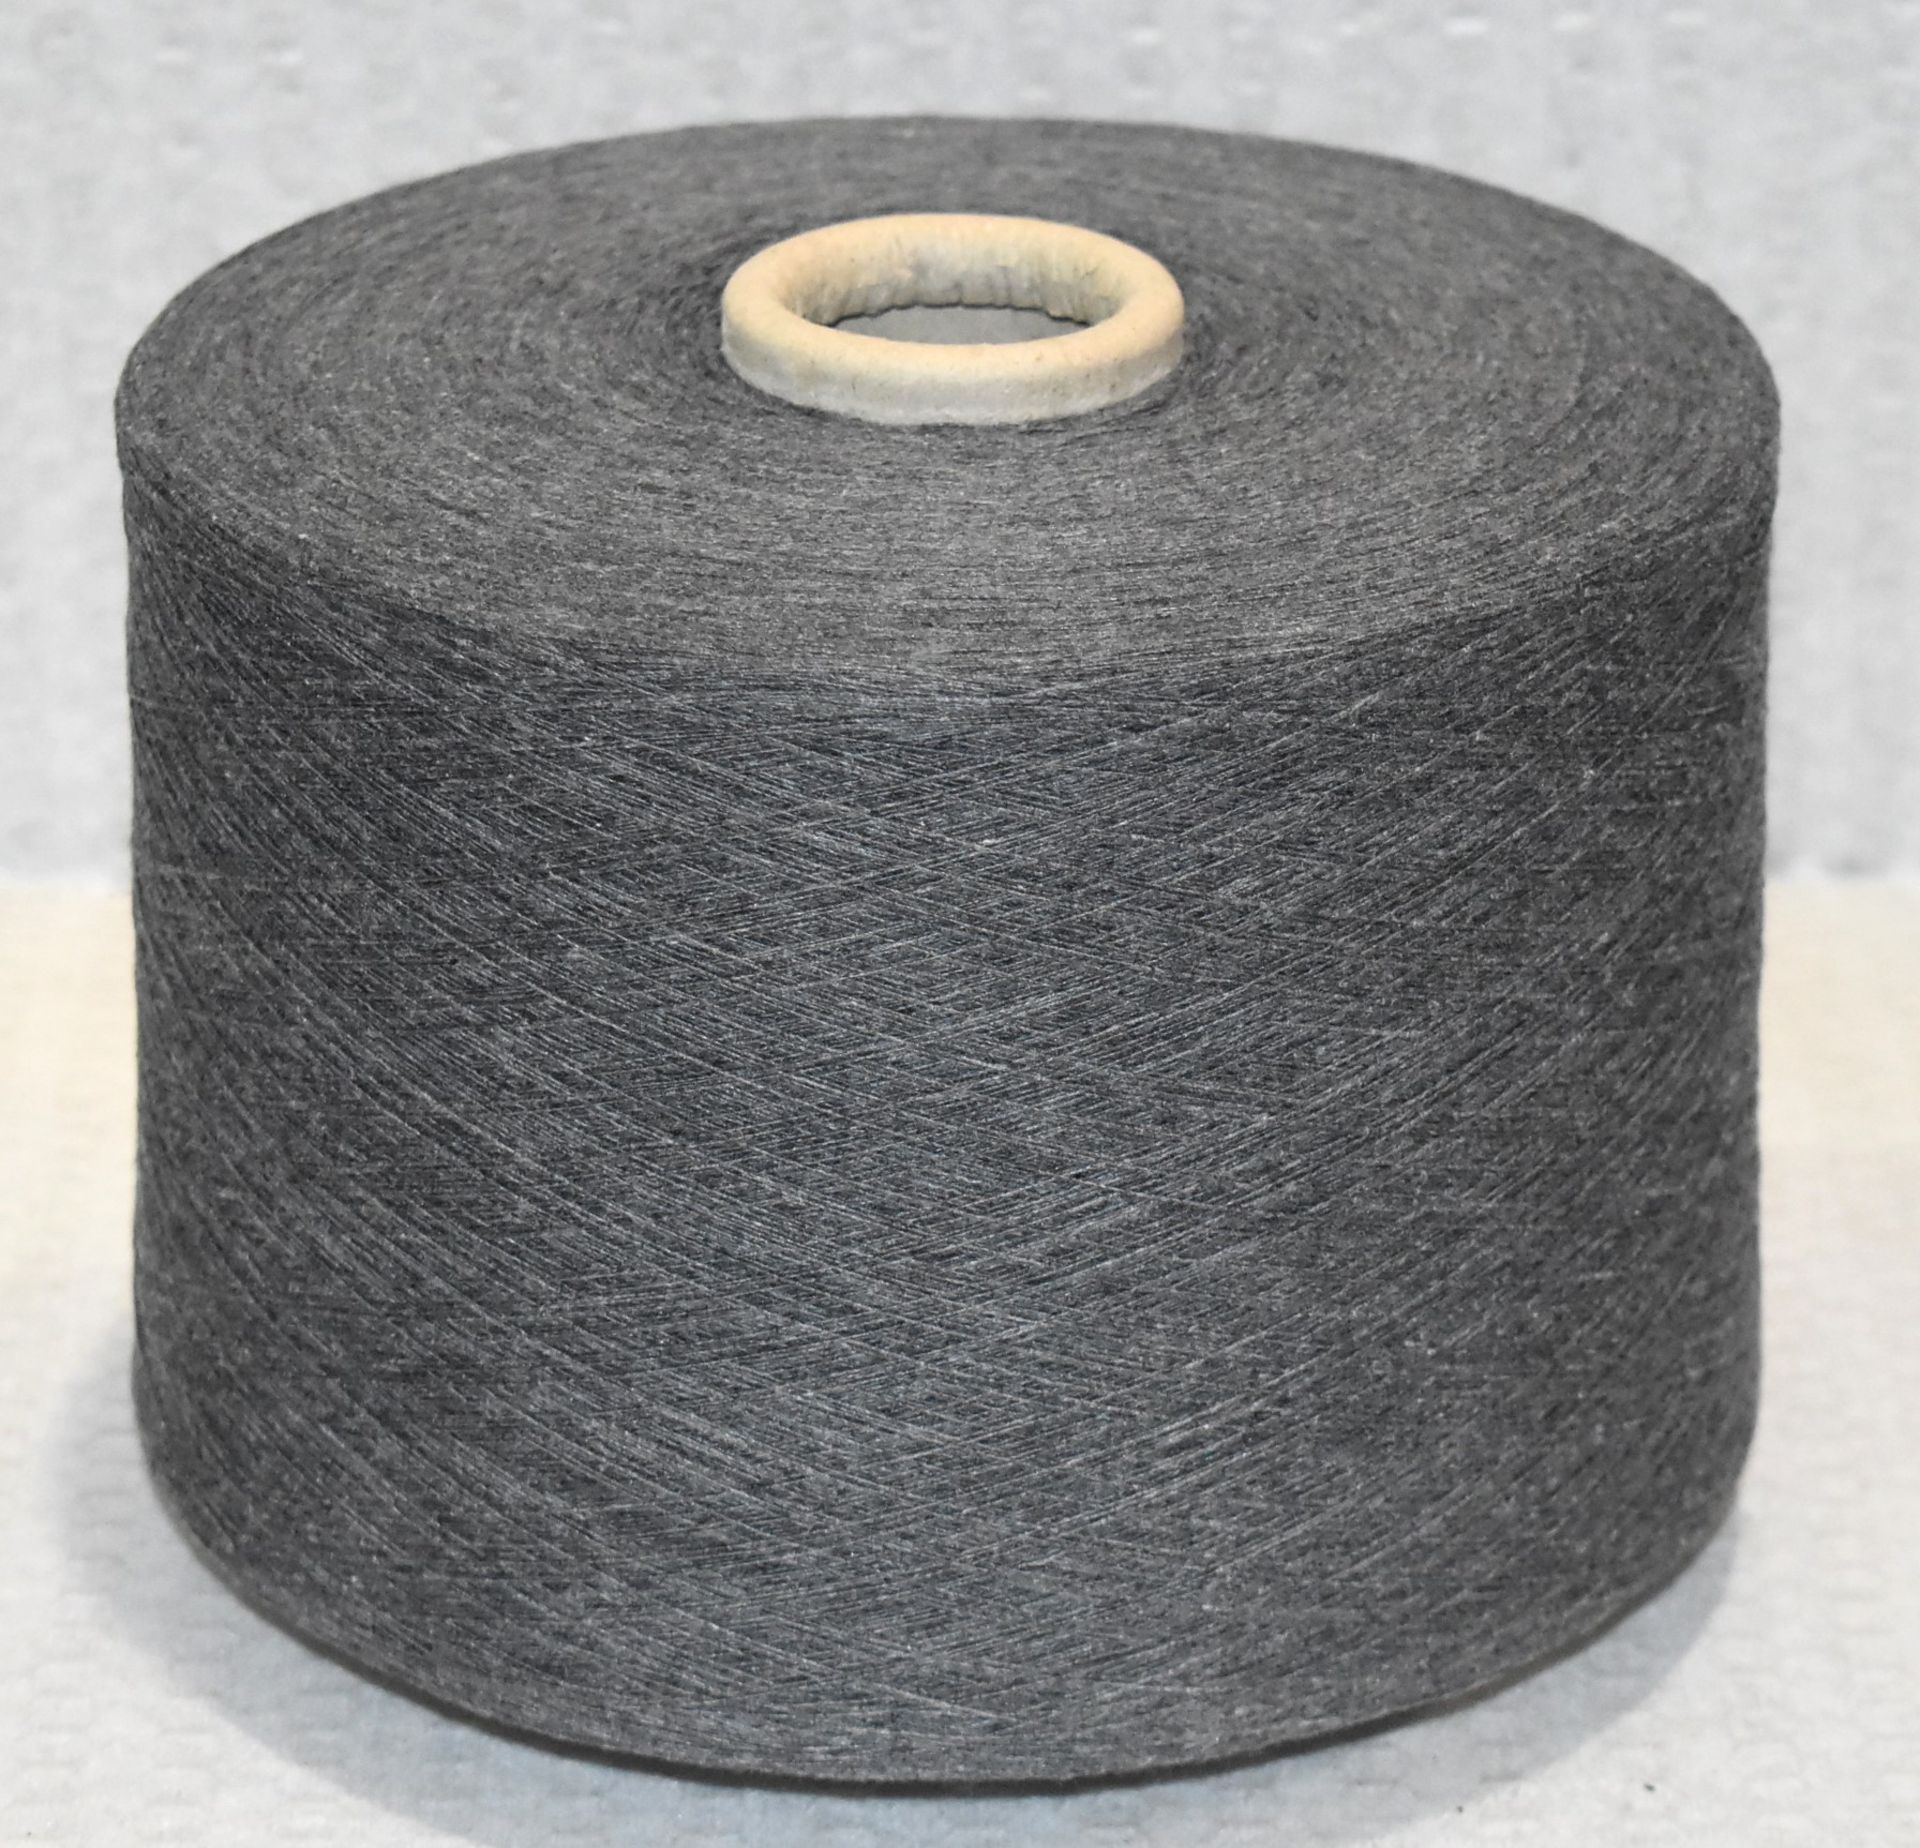 1 x Cone of 1/13 MicroCotton Knitting Yarn - Mid Grey - Approx Weight: 2,500g - New Stock ABL Yarn - Image 4 of 18